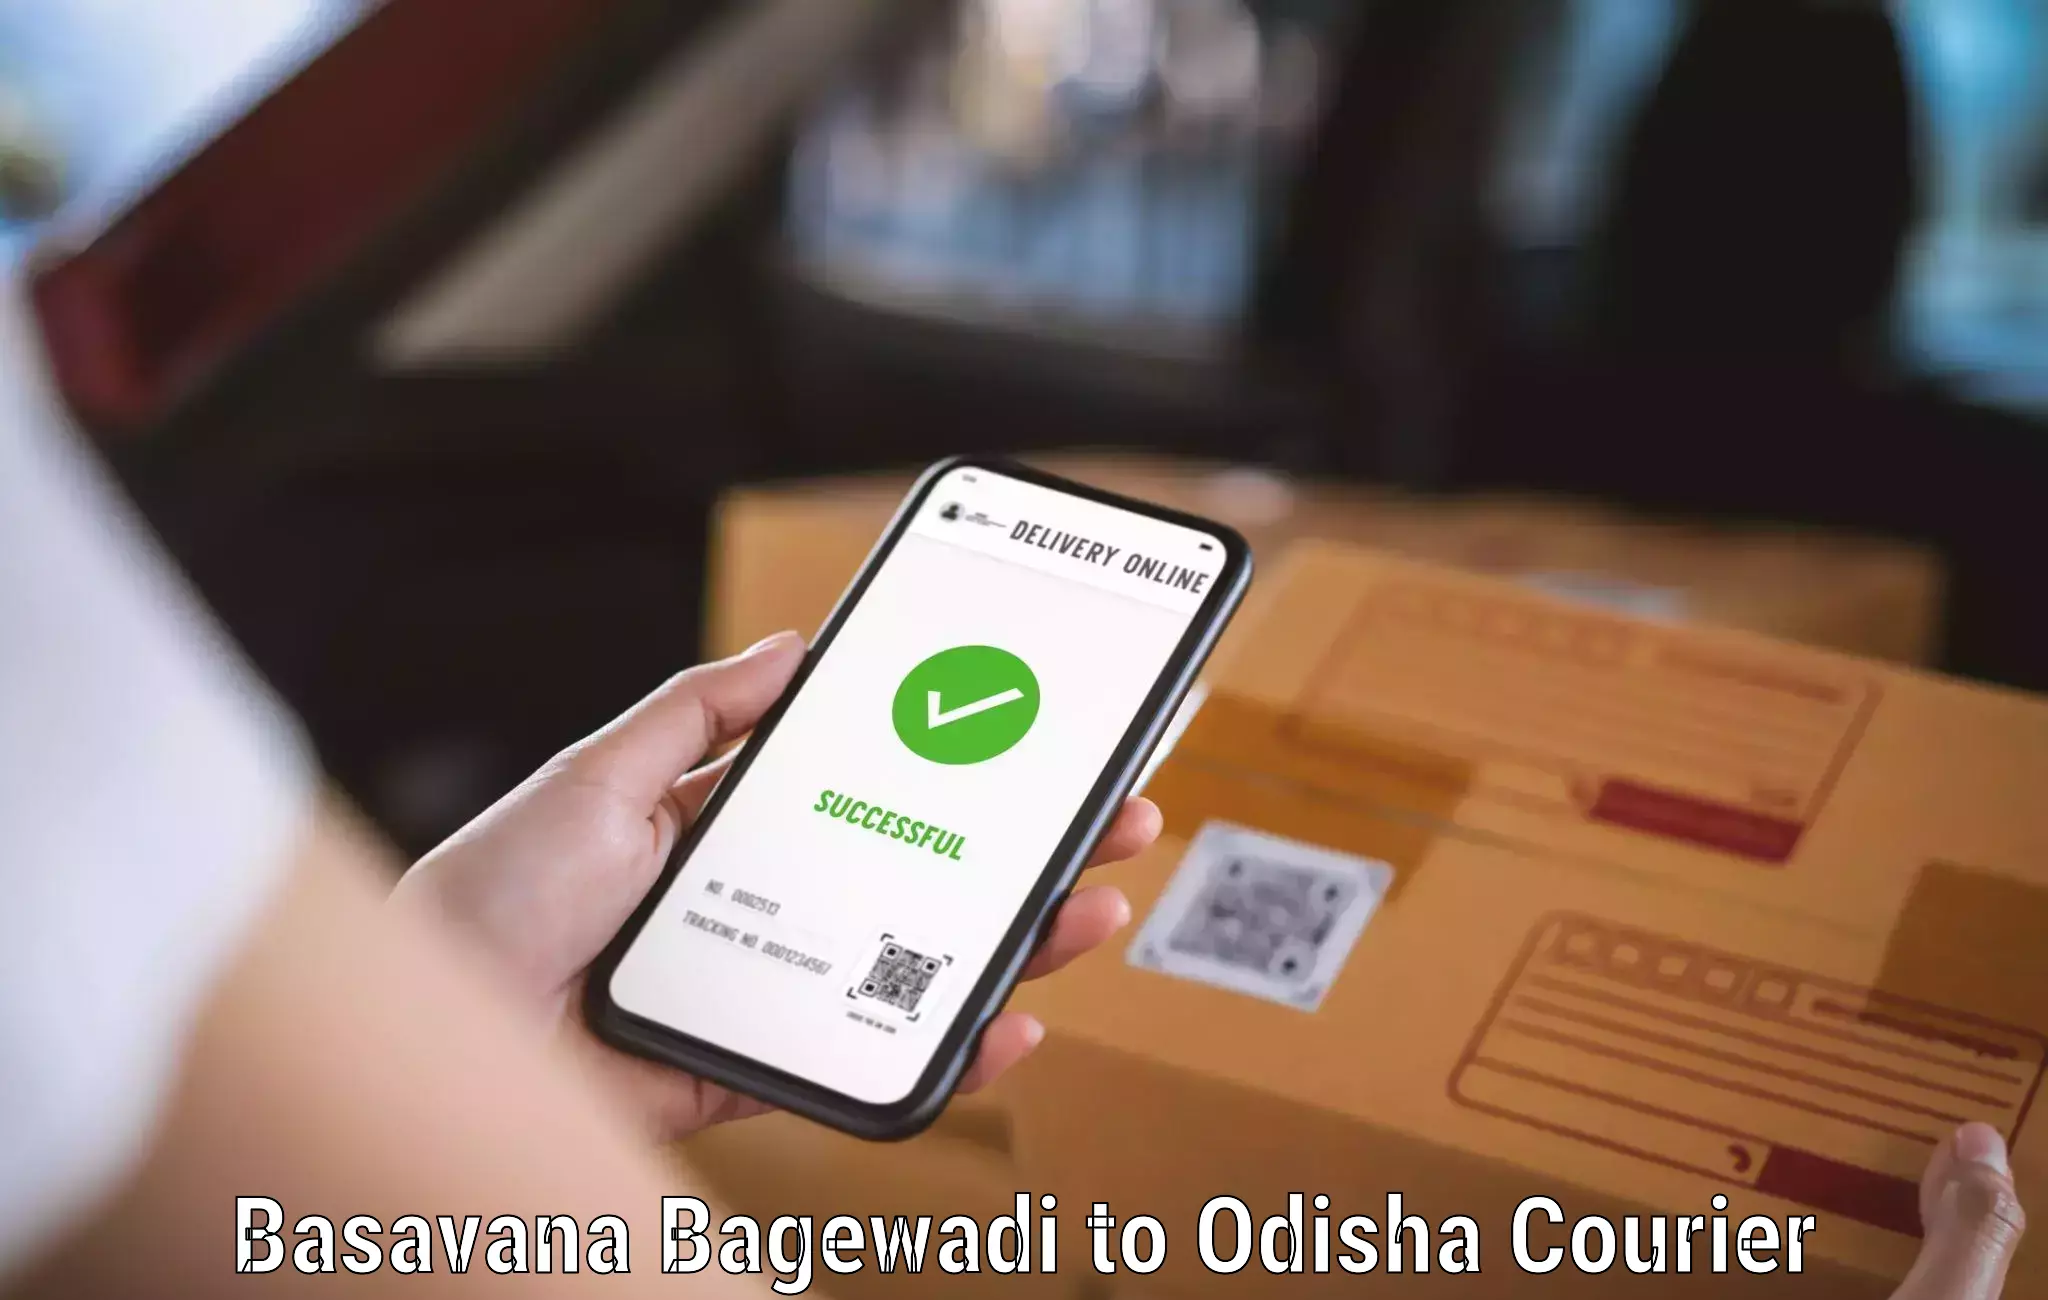 State-of-the-art courier technology Basavana Bagewadi to Bissam Cuttack